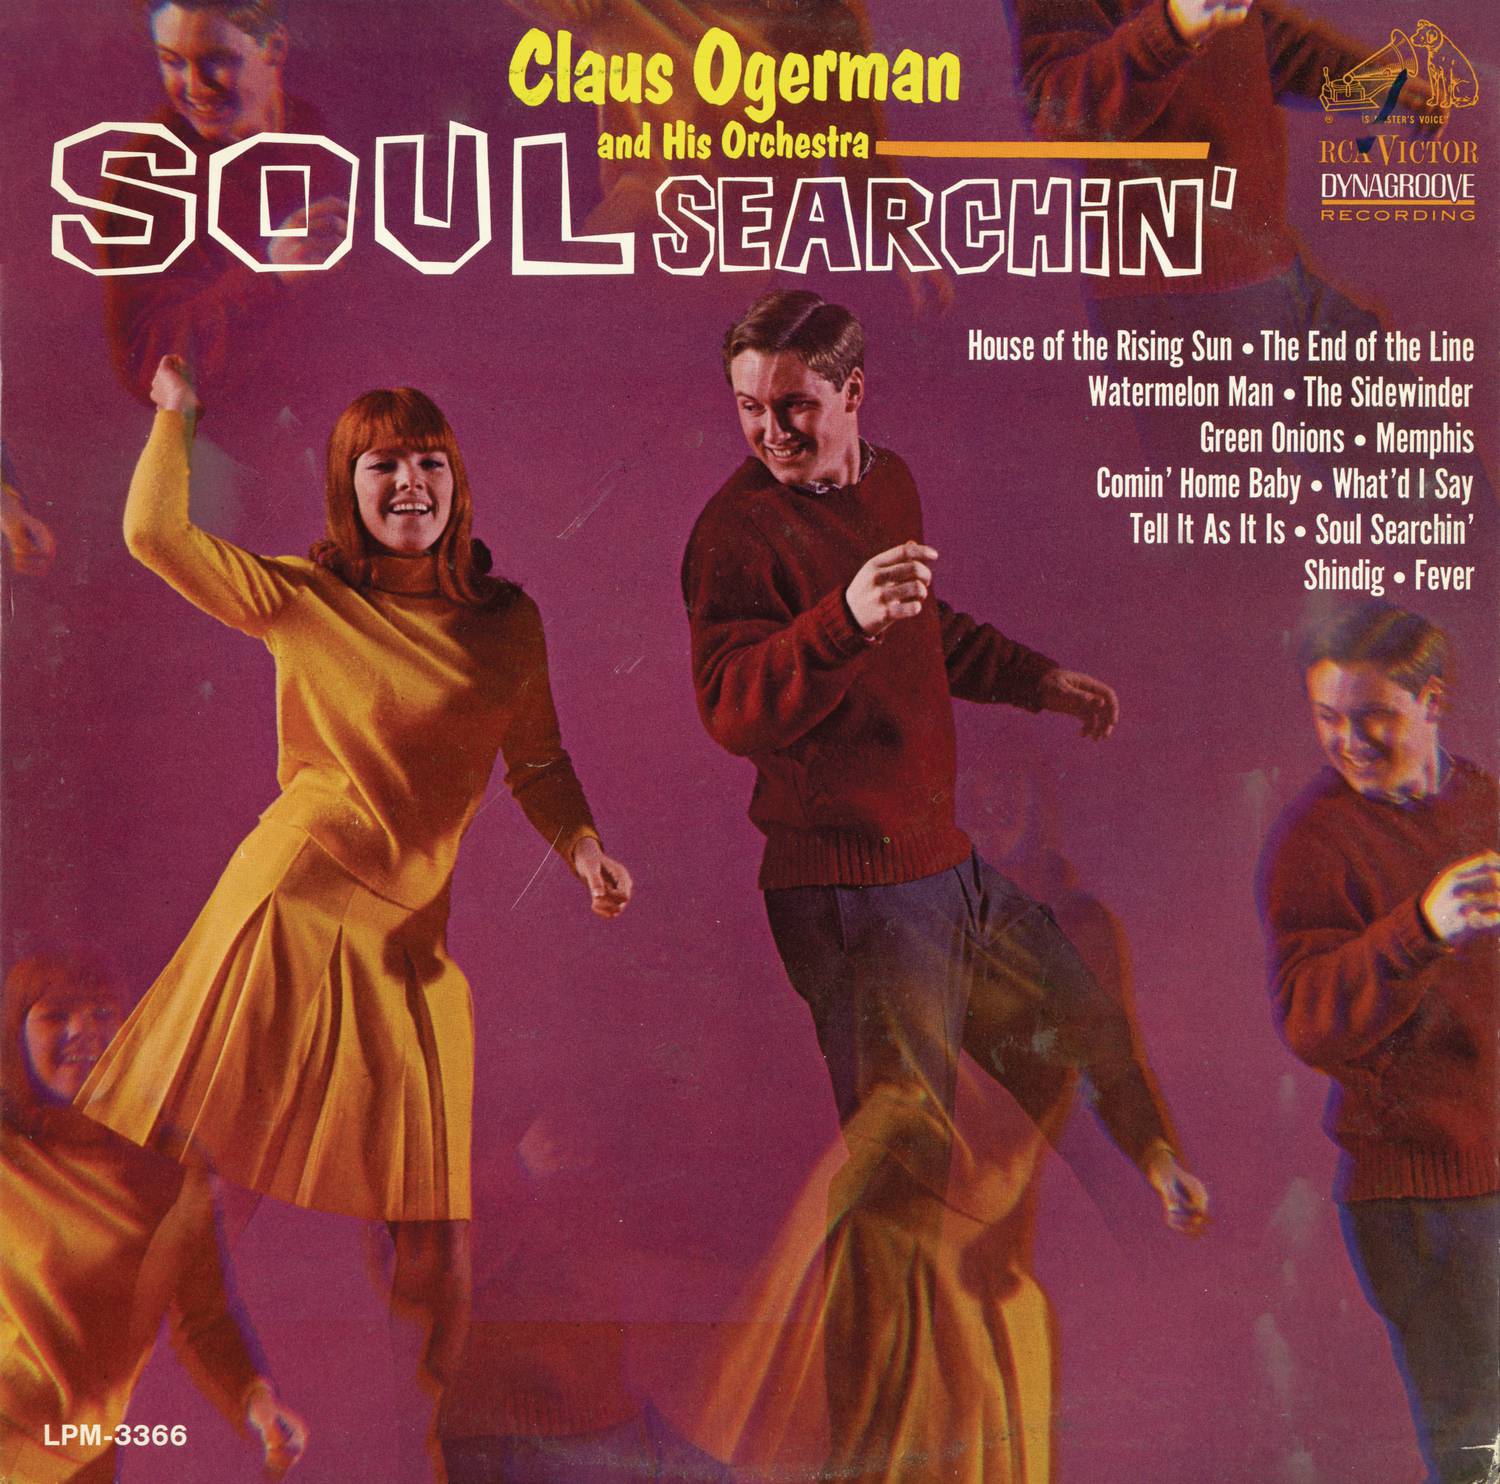 Claus Ogerman And His Orchestra – Soul Searchin’ (1965/2015) [AcousticSounds FLAC 24bit/96kHz]